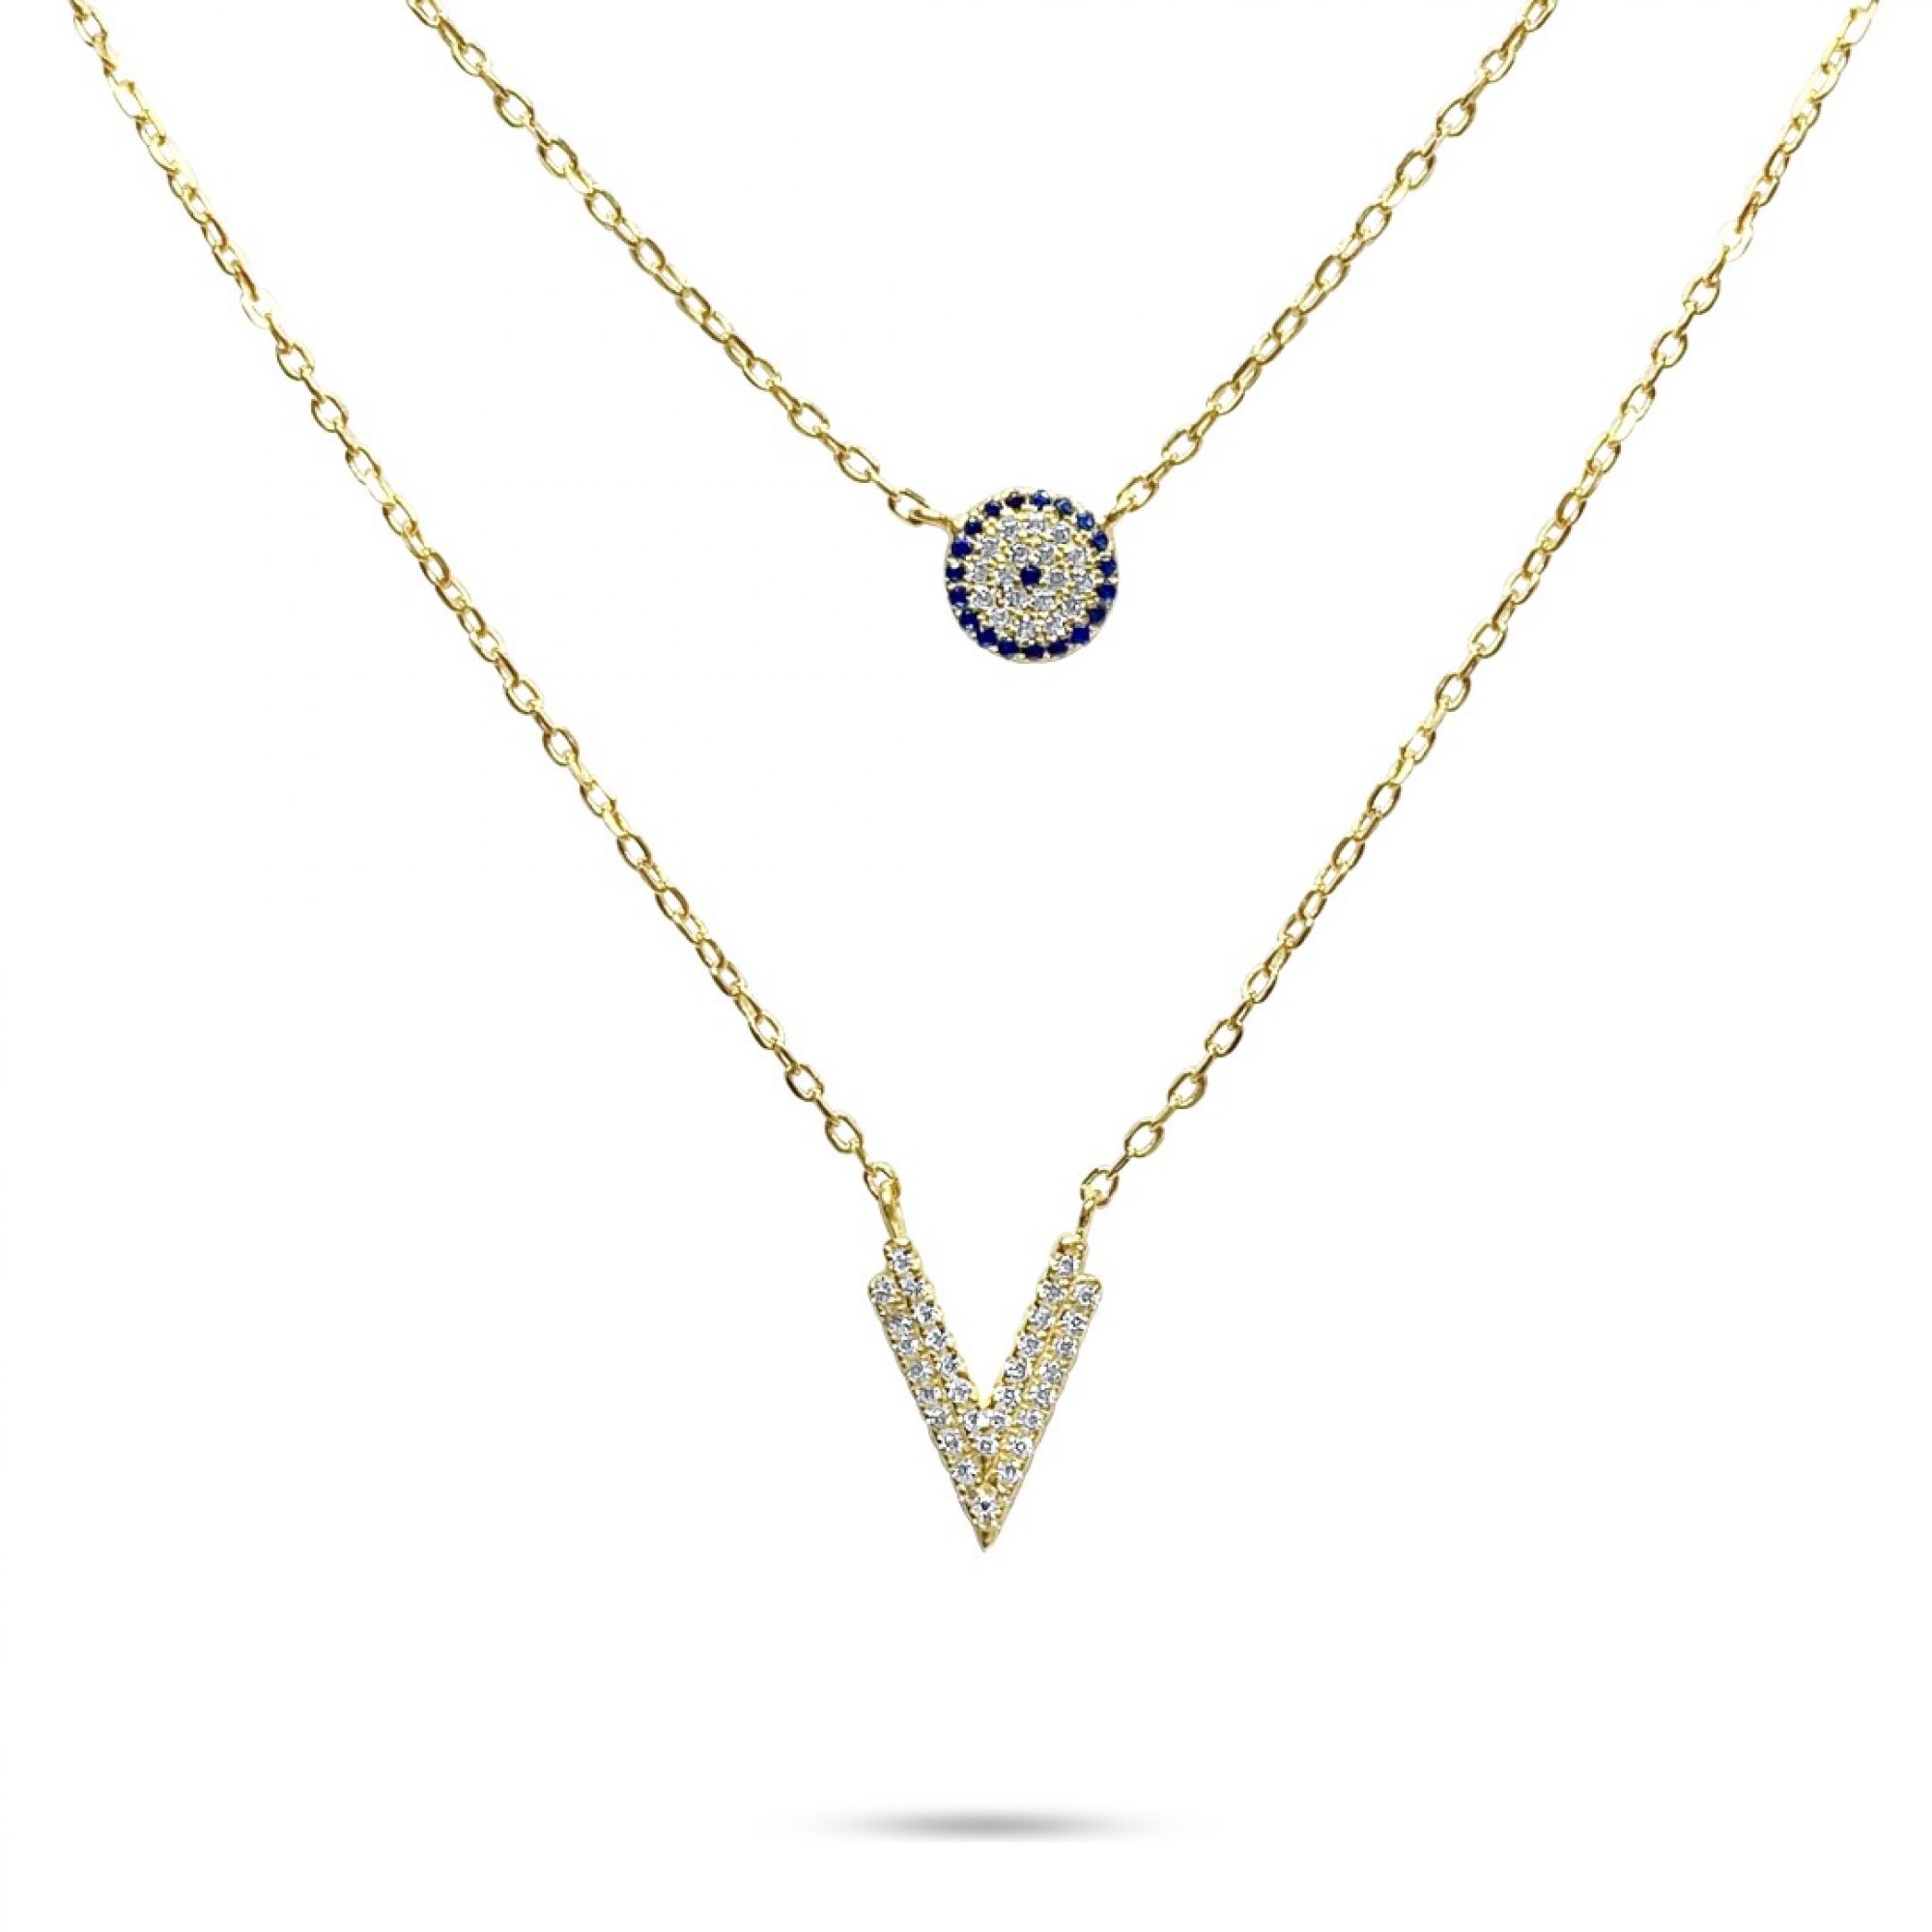 Gold plated double eye necklace with zircon stones